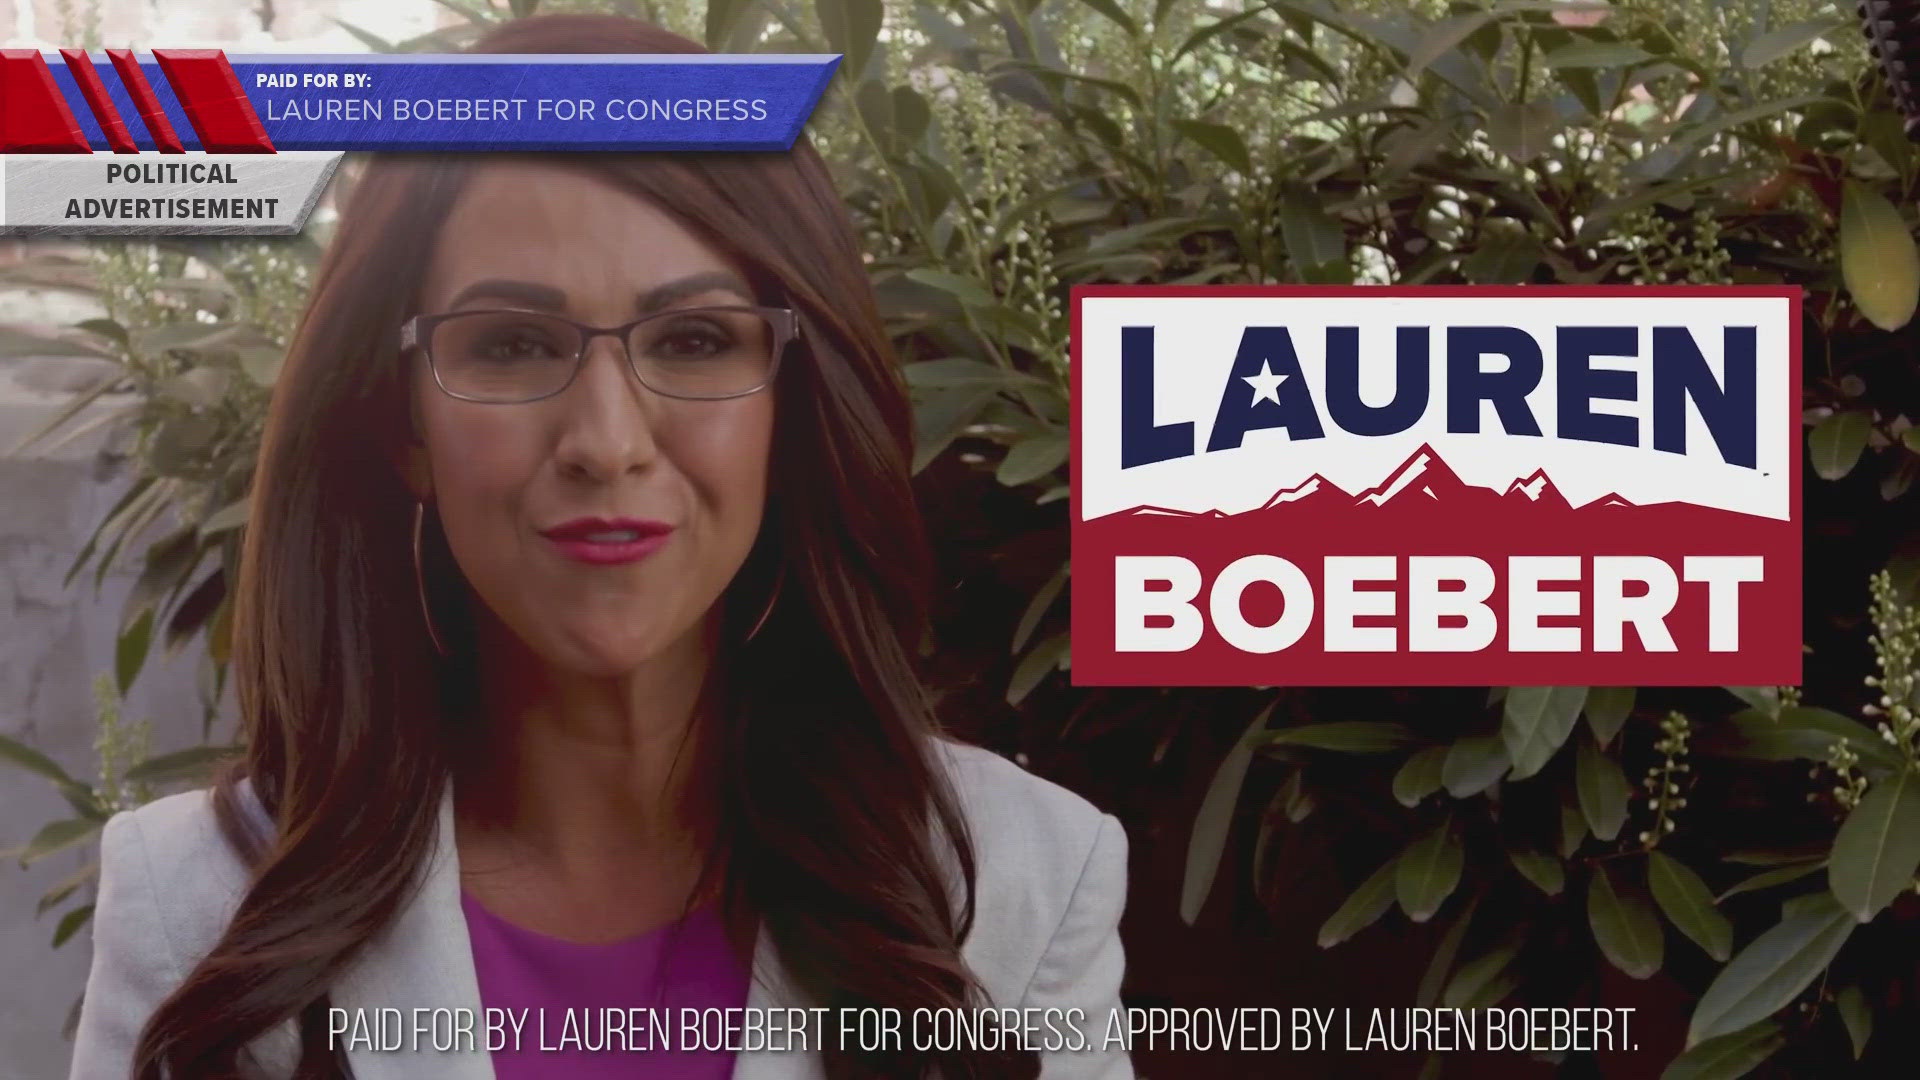 Boebert's primary rivals have yet to hit the airwaves, though two of them say they plan on releasing ads by the time ballots drop.